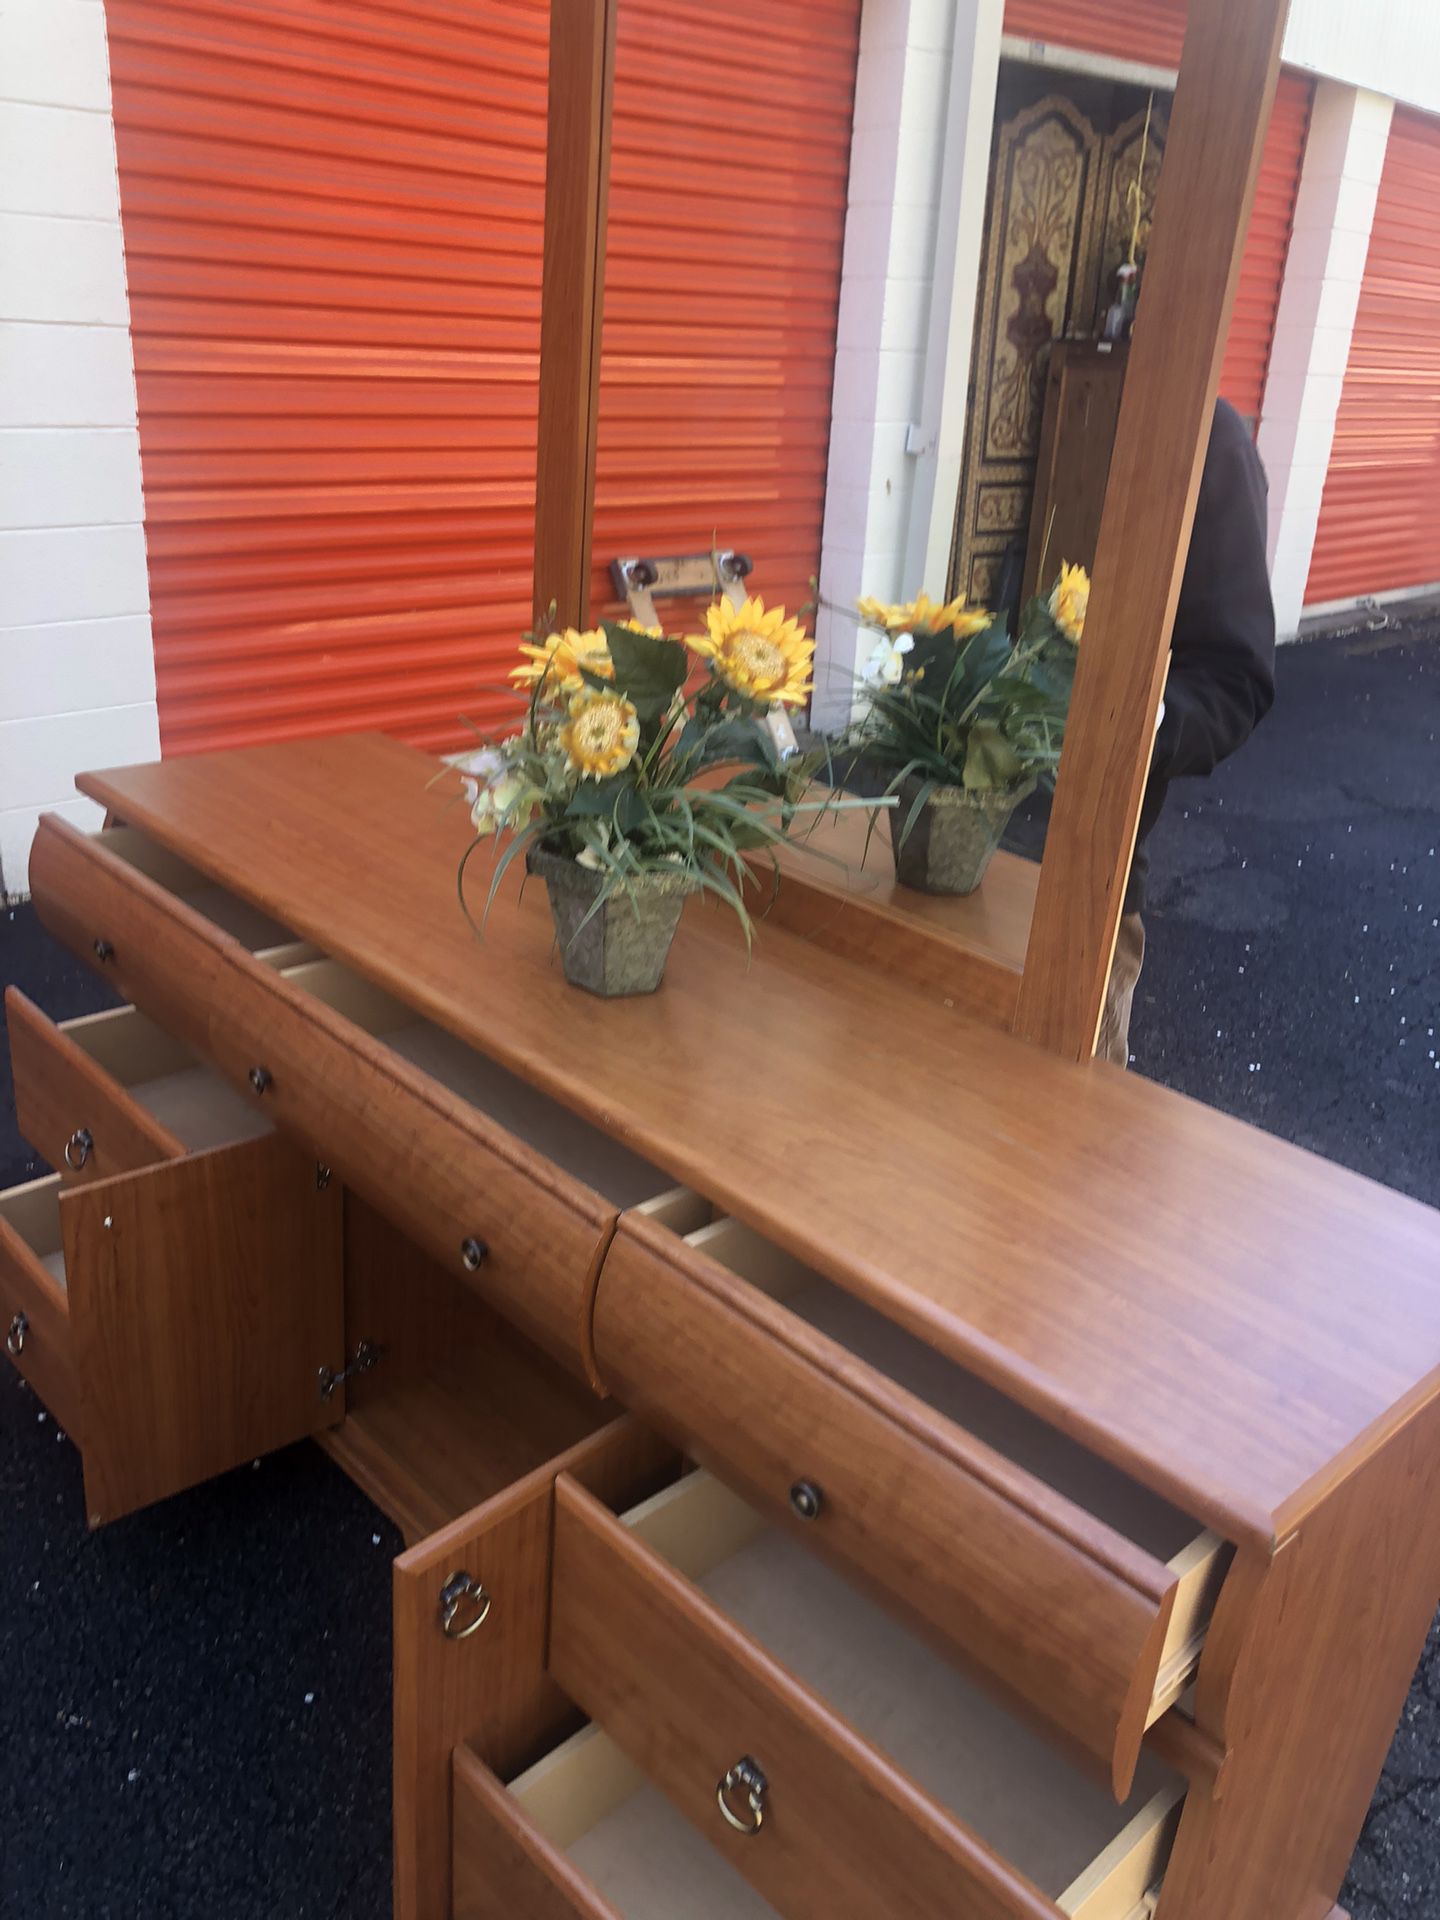 Modern Long Dresser With Big Mirror. Drawers Sliding Smoothly Great Confition